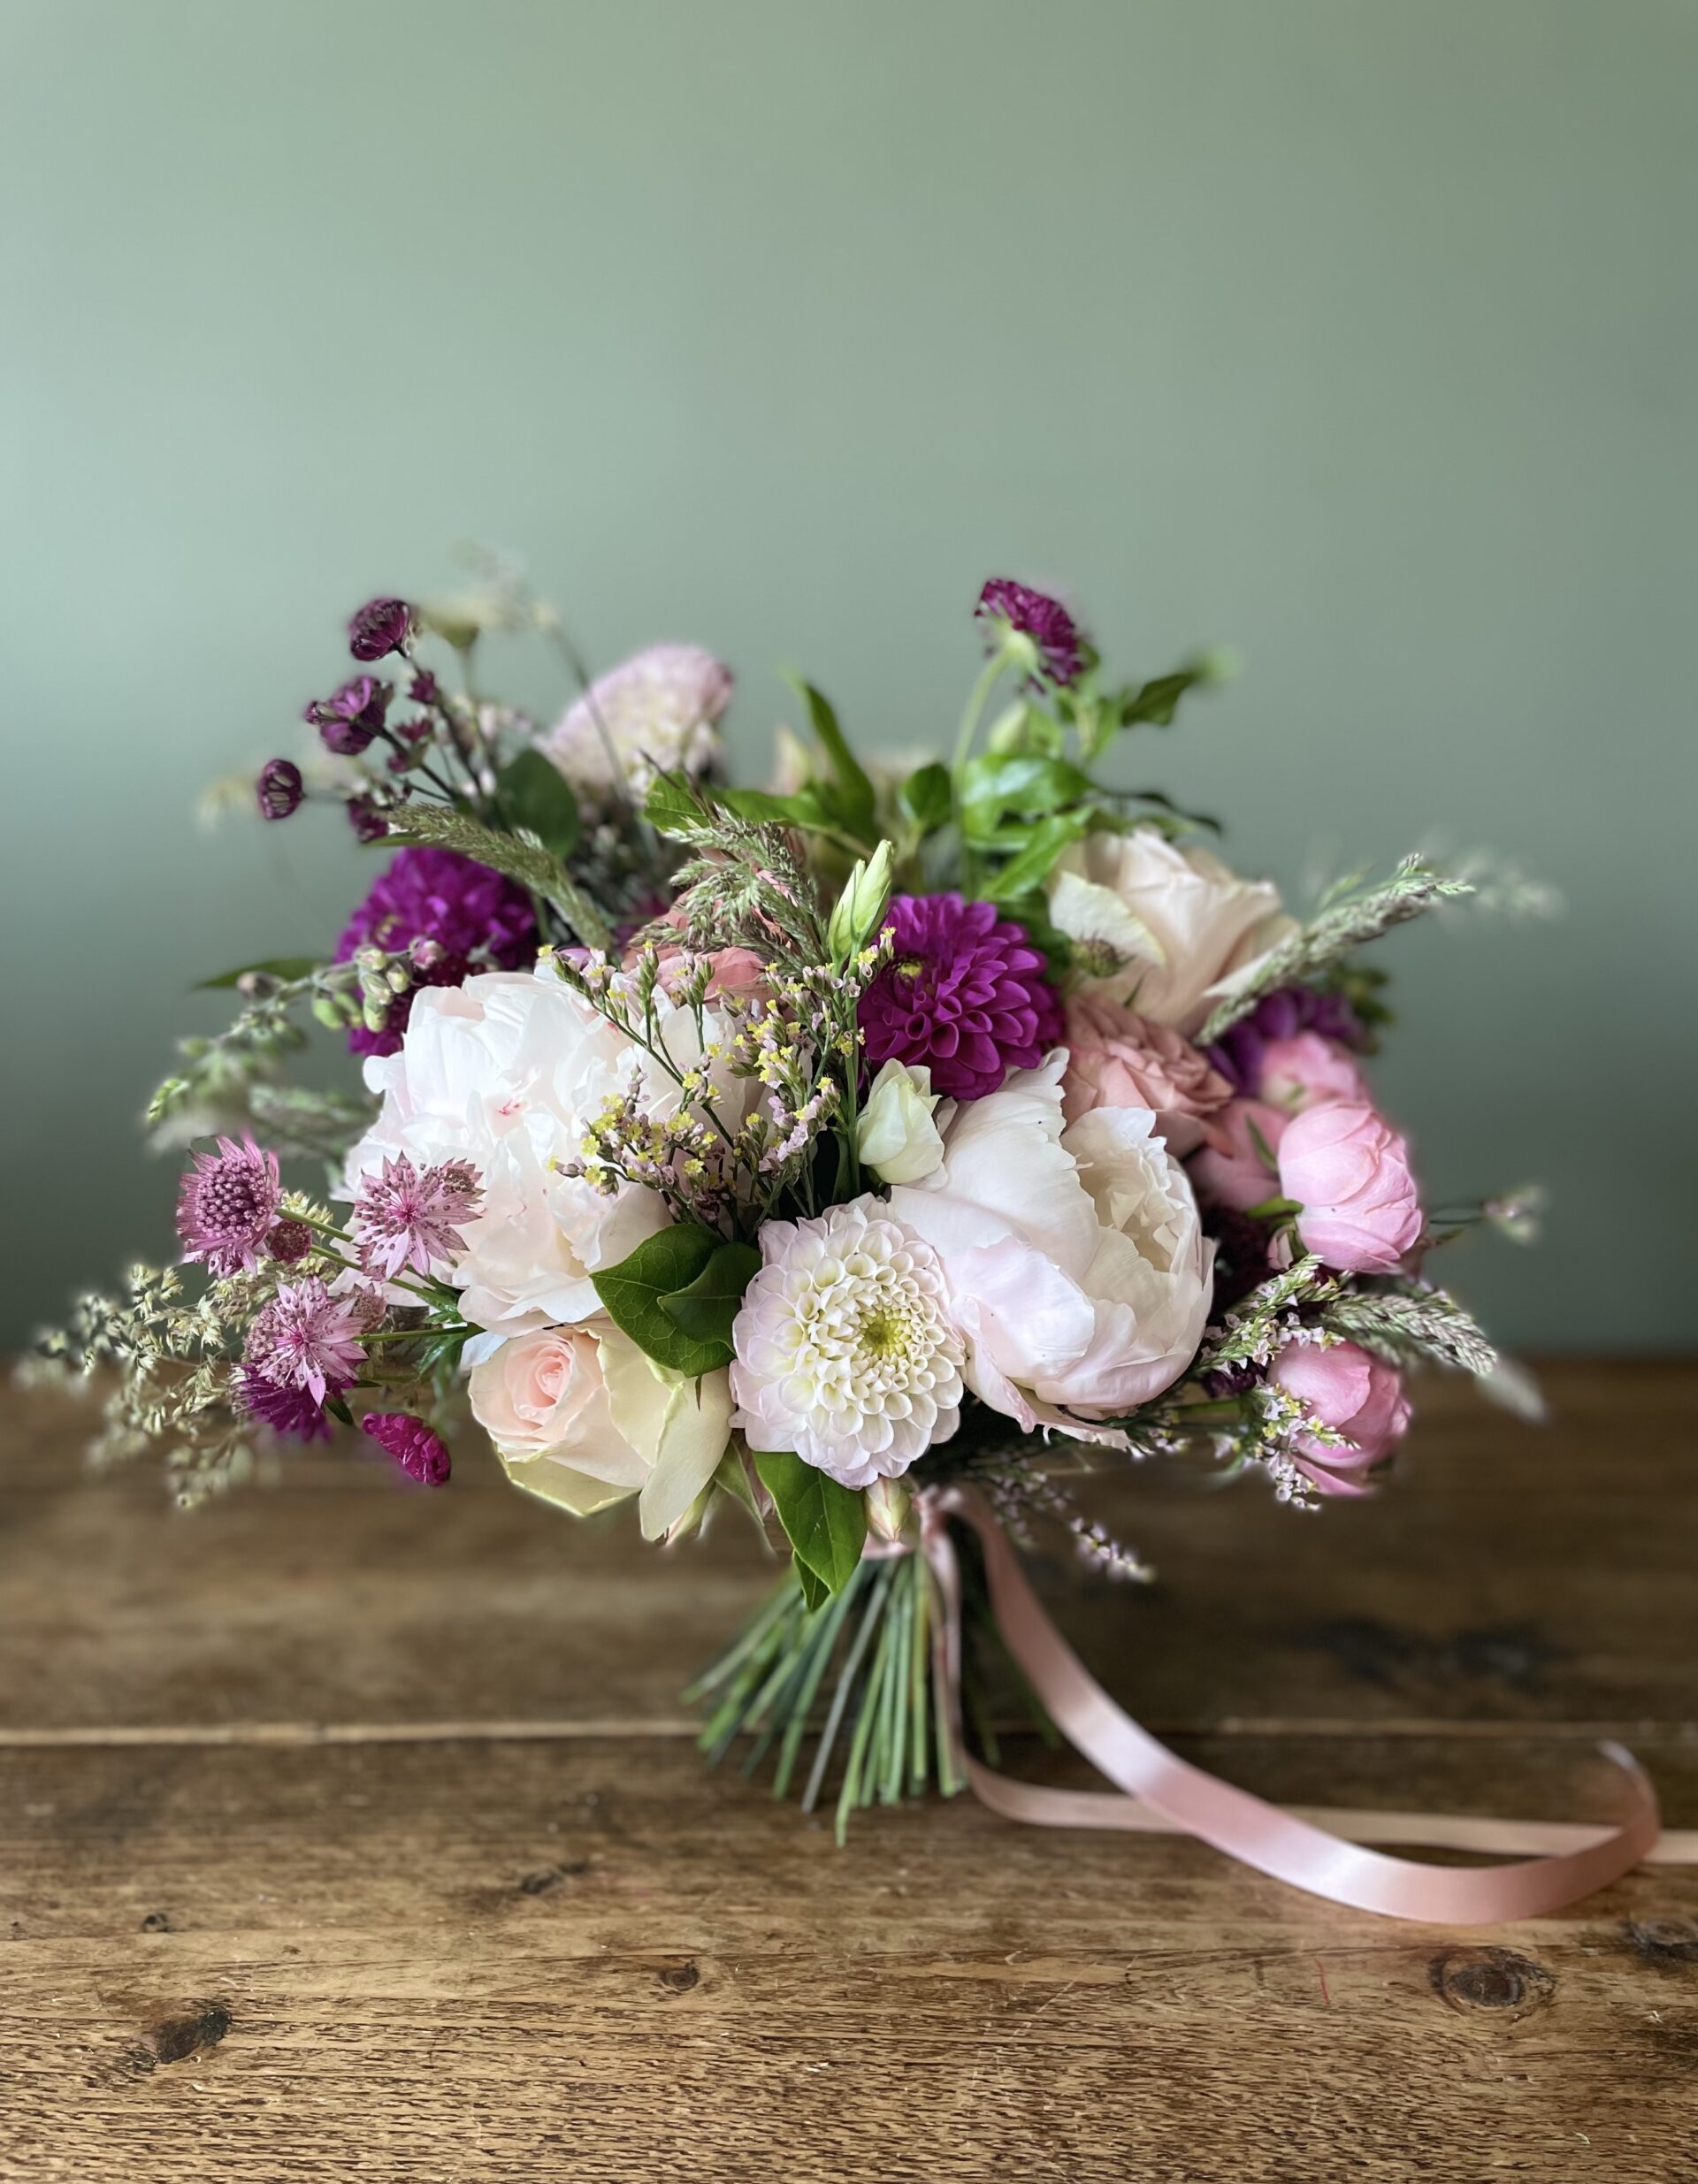 A pink and white wedding bouquet